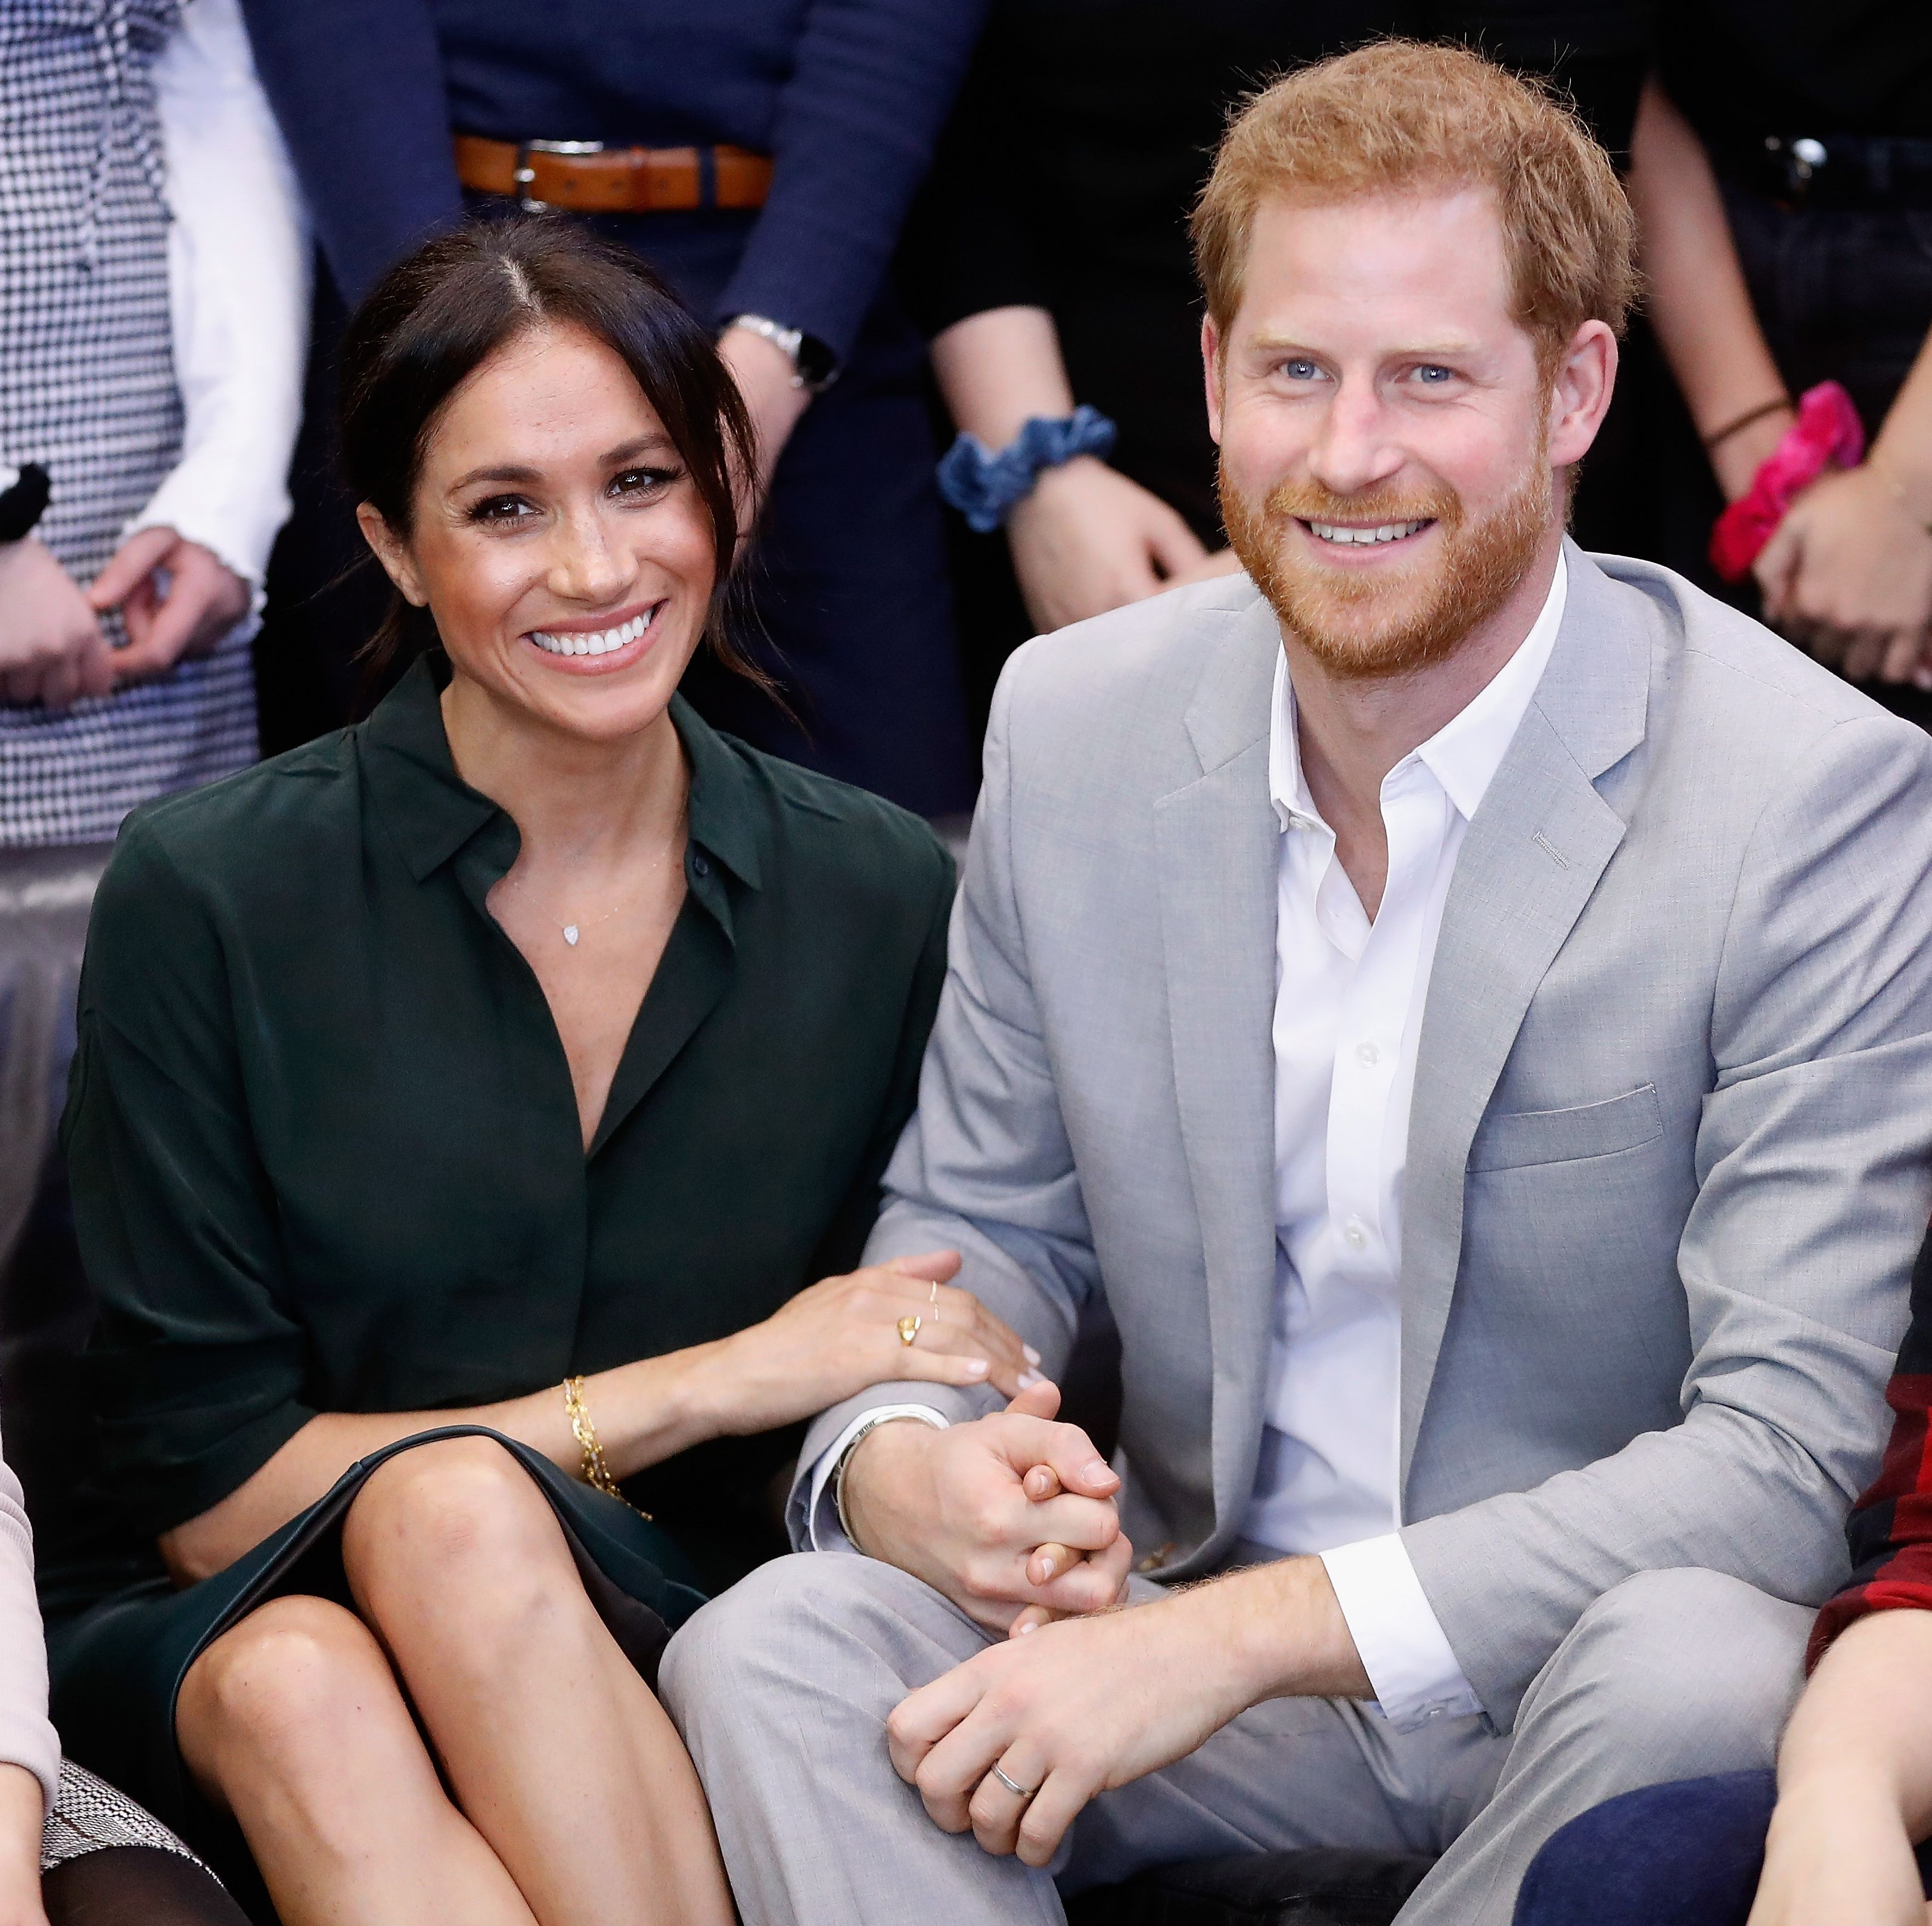 Meghan Markle and Prince Harry Reveal First Photo of Daughter Lilibet in 2021 Christmas Card